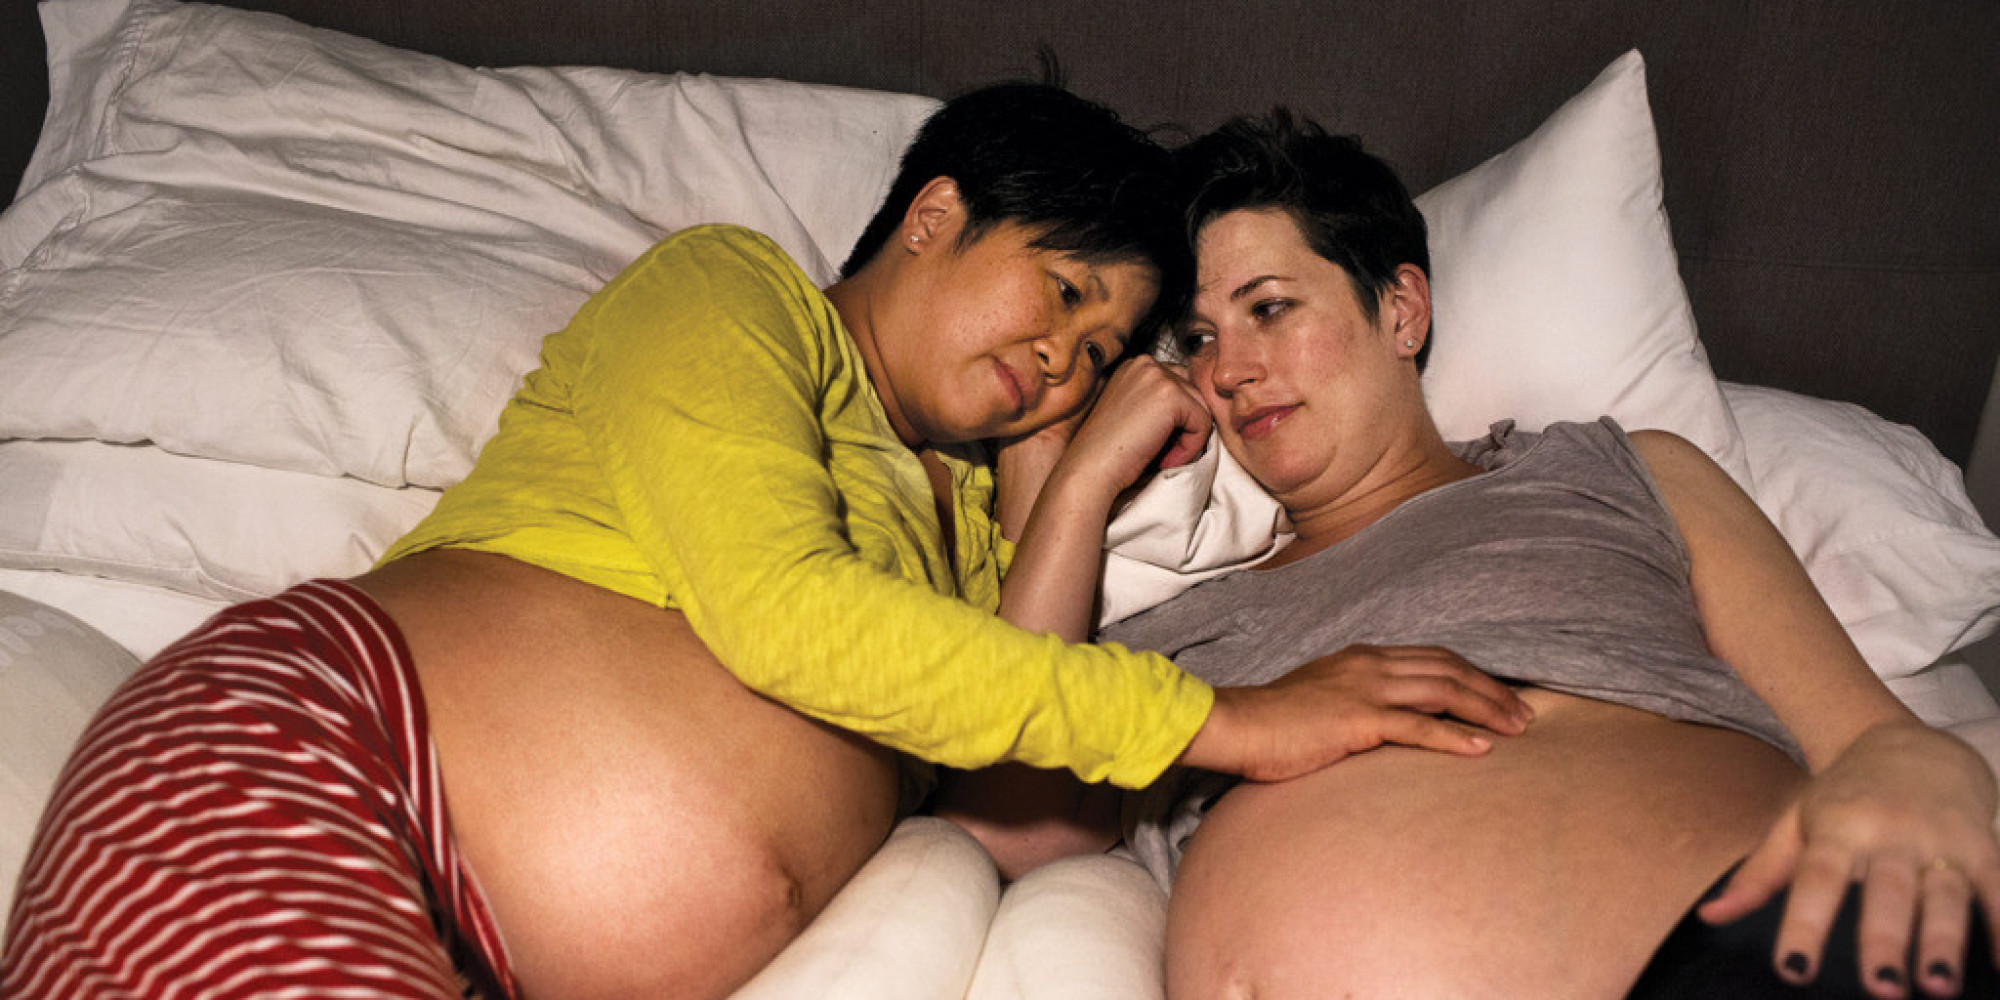 Pregnant And Lesbian 38